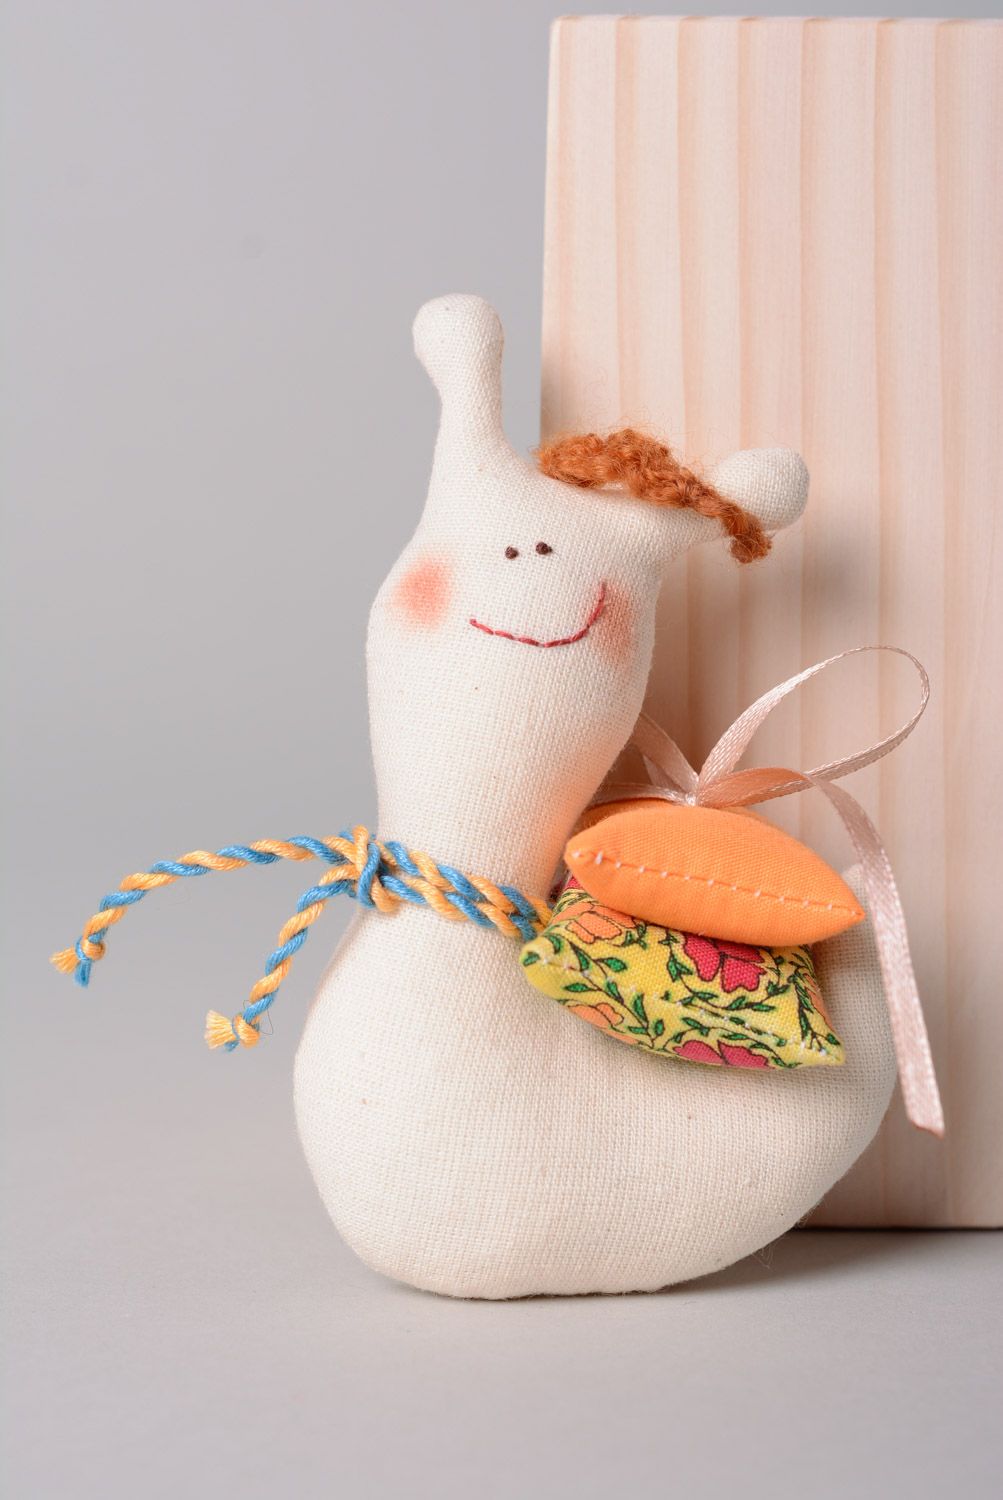 Small handmade designer soft toy sewn of natural fabrics in the shape of snail photo 1